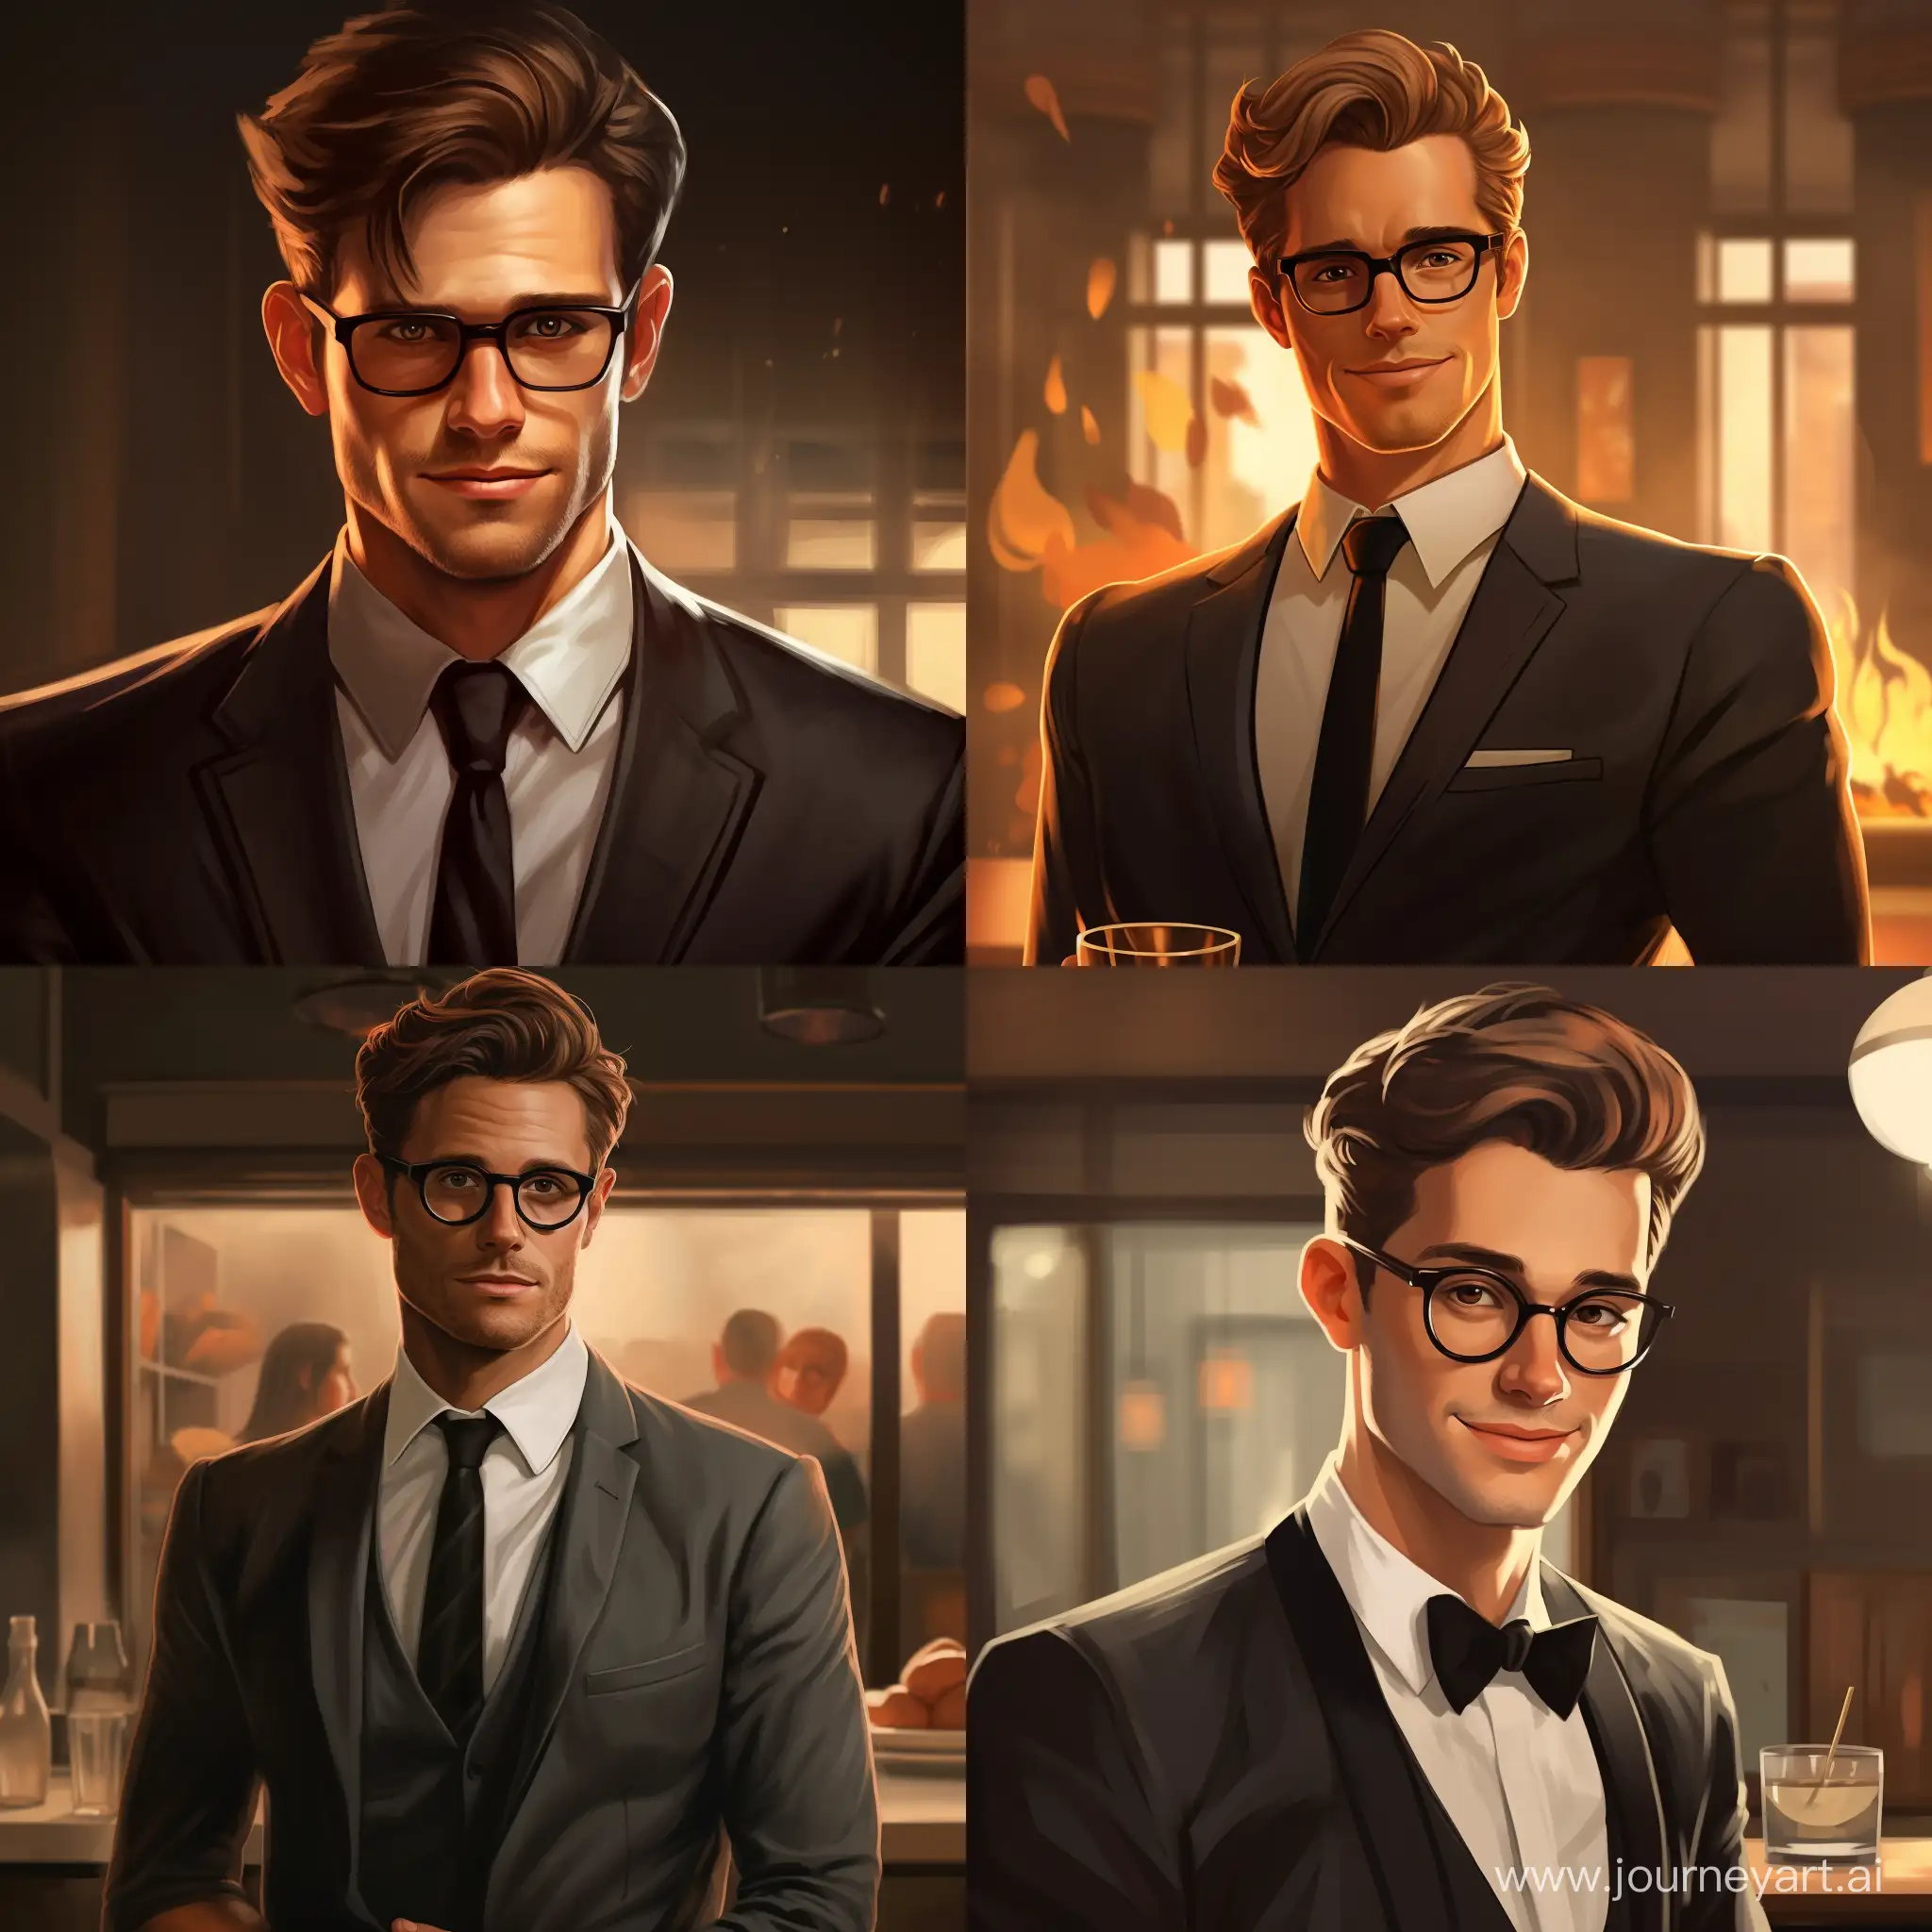 Charming-Young-Businessman-with-an-Evil-Grin-in-Zack-Snyder-Style